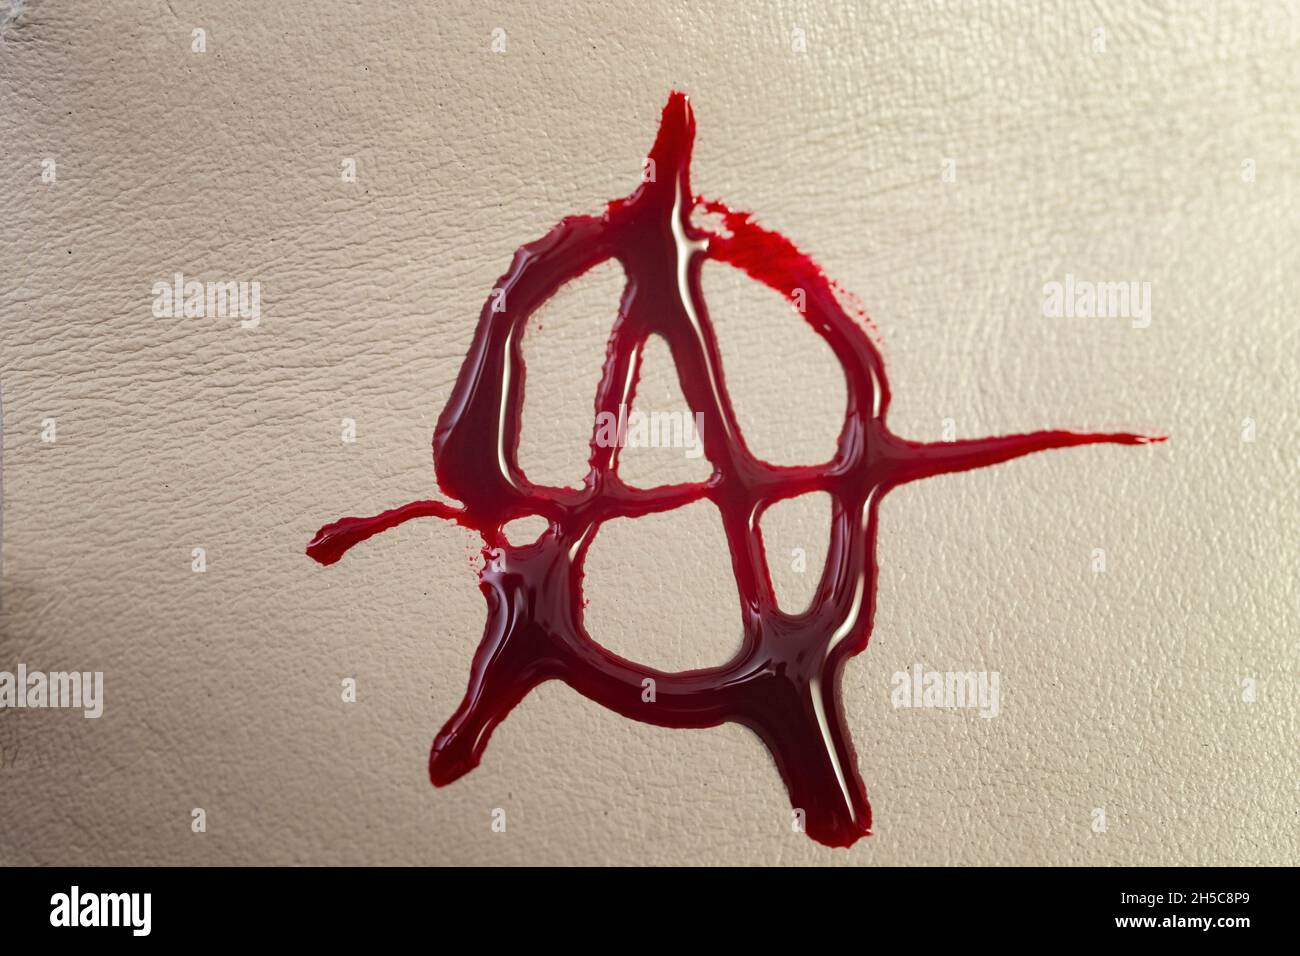 anarchy symbol made with blood on fake leather texture Stock Photo